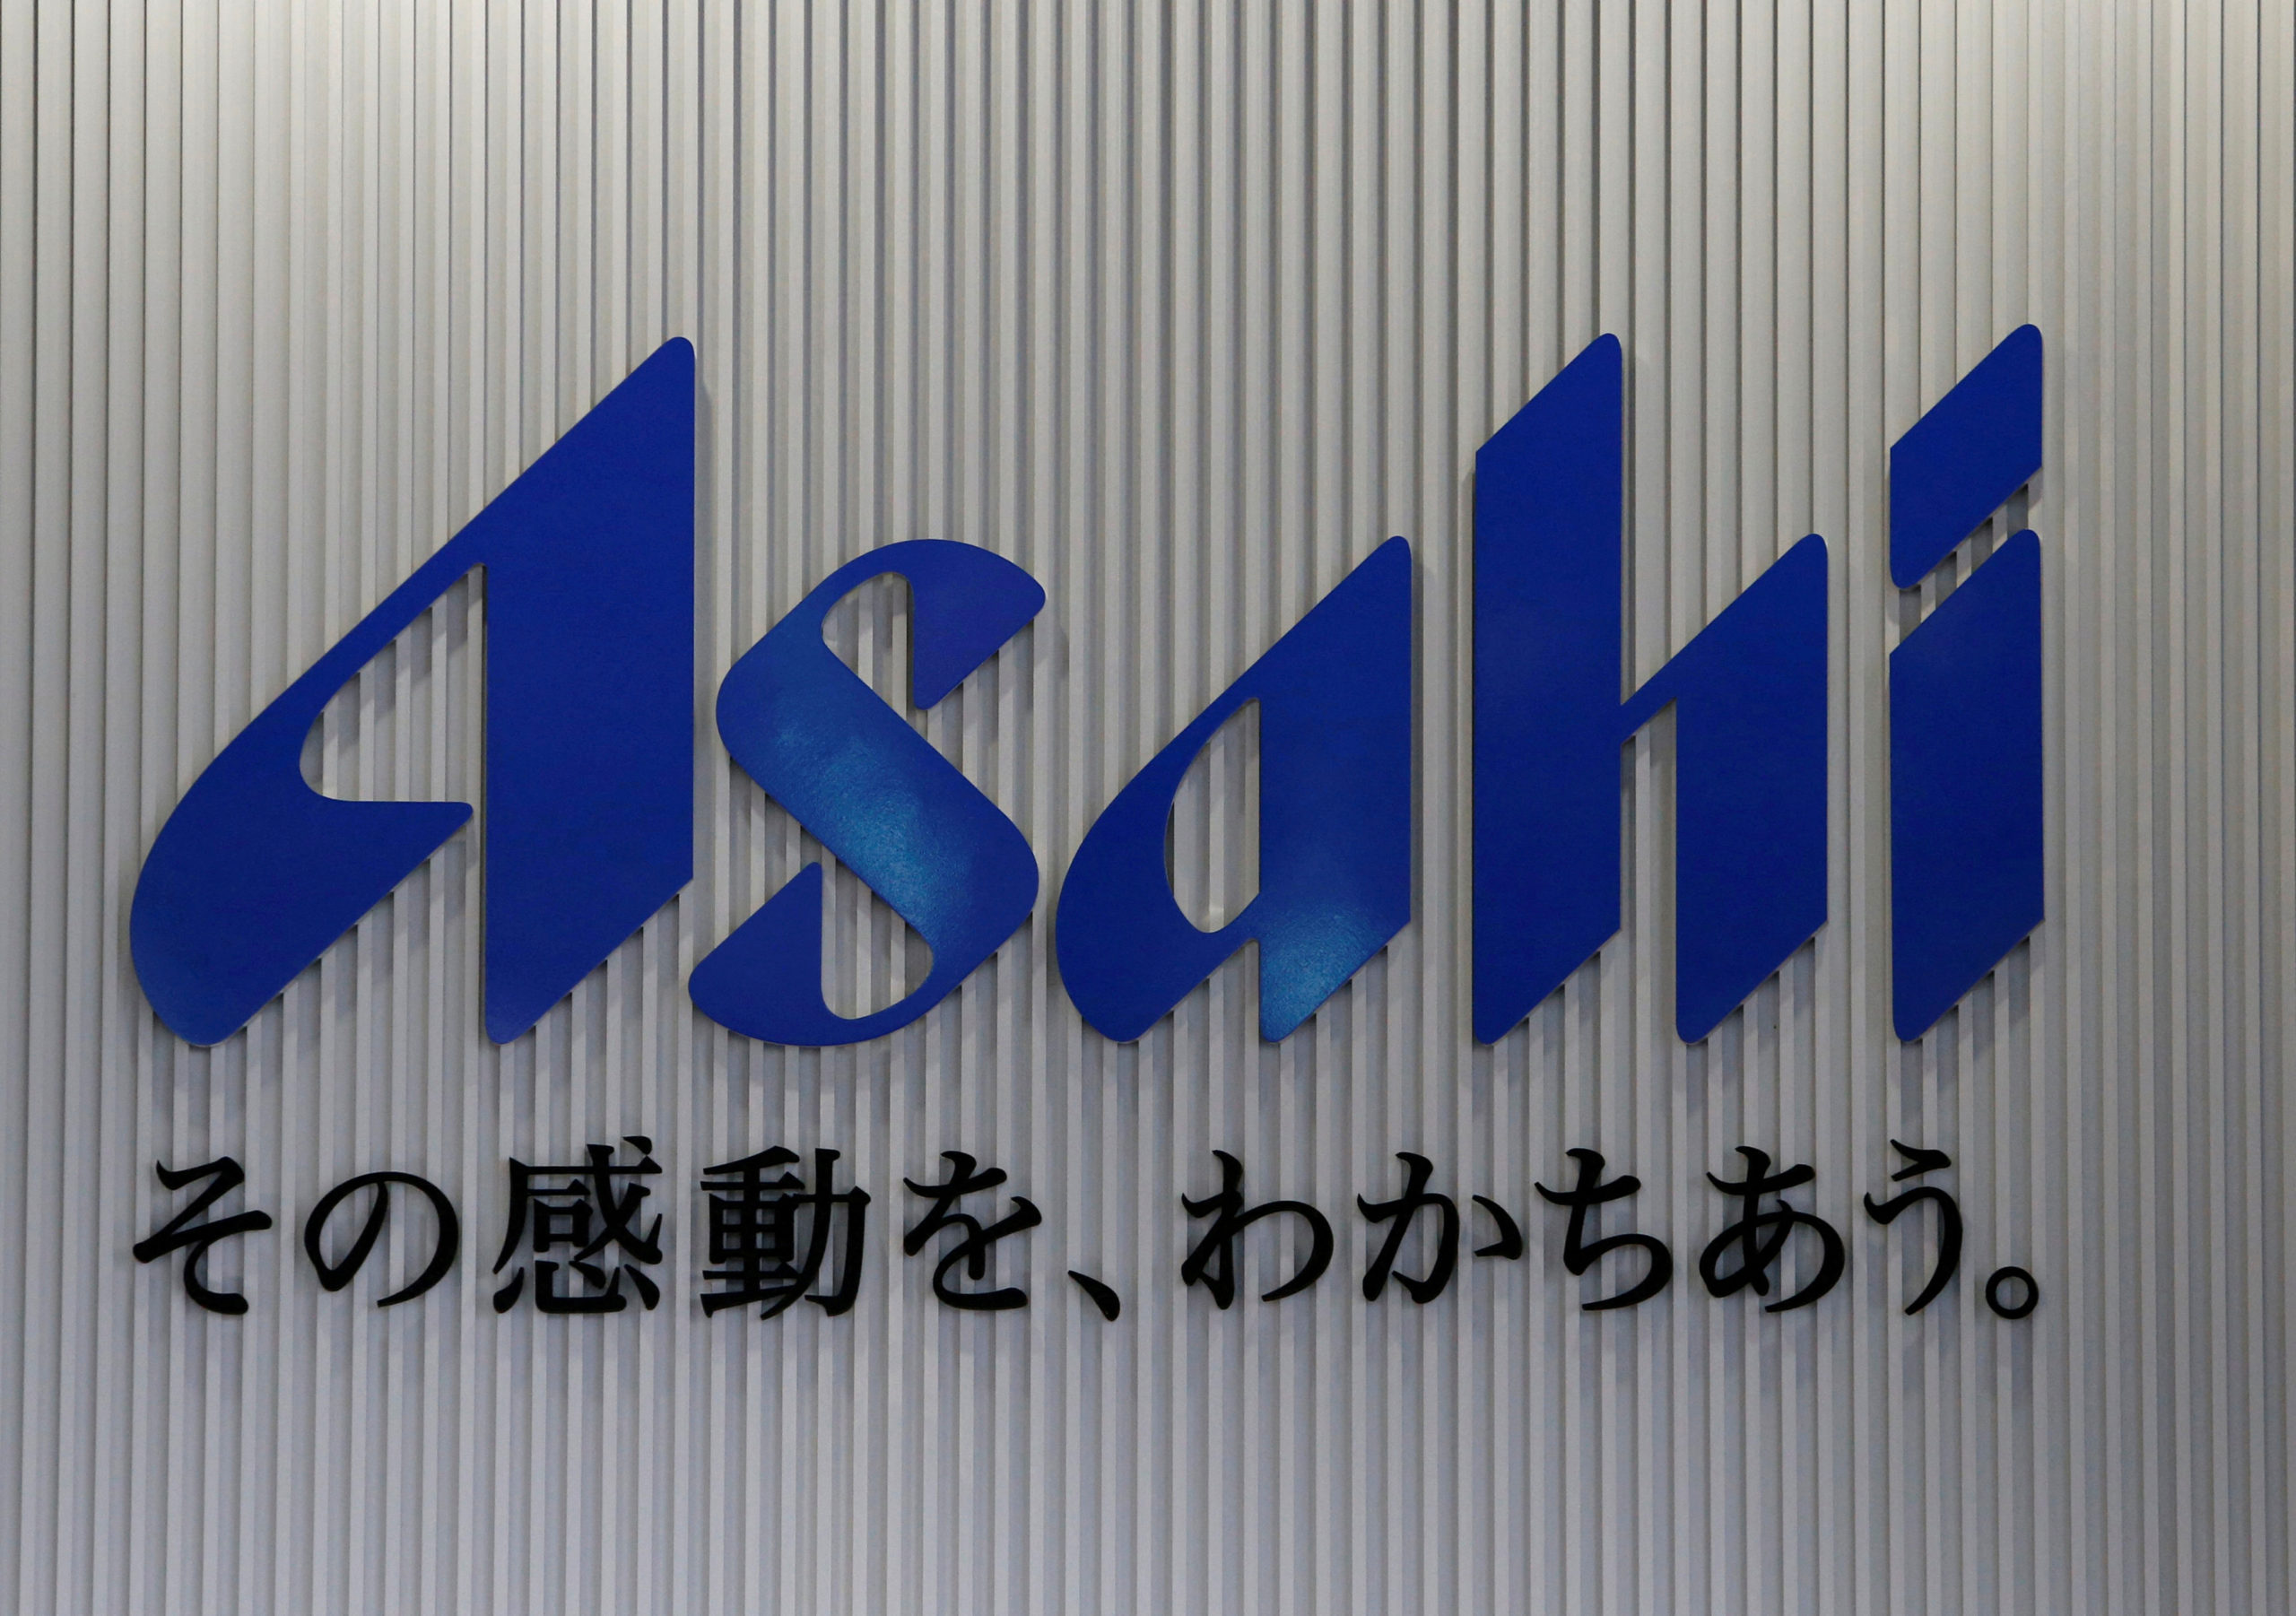 Asahi's flagship Super Dry beer to undergo biggest makeover in 35 years